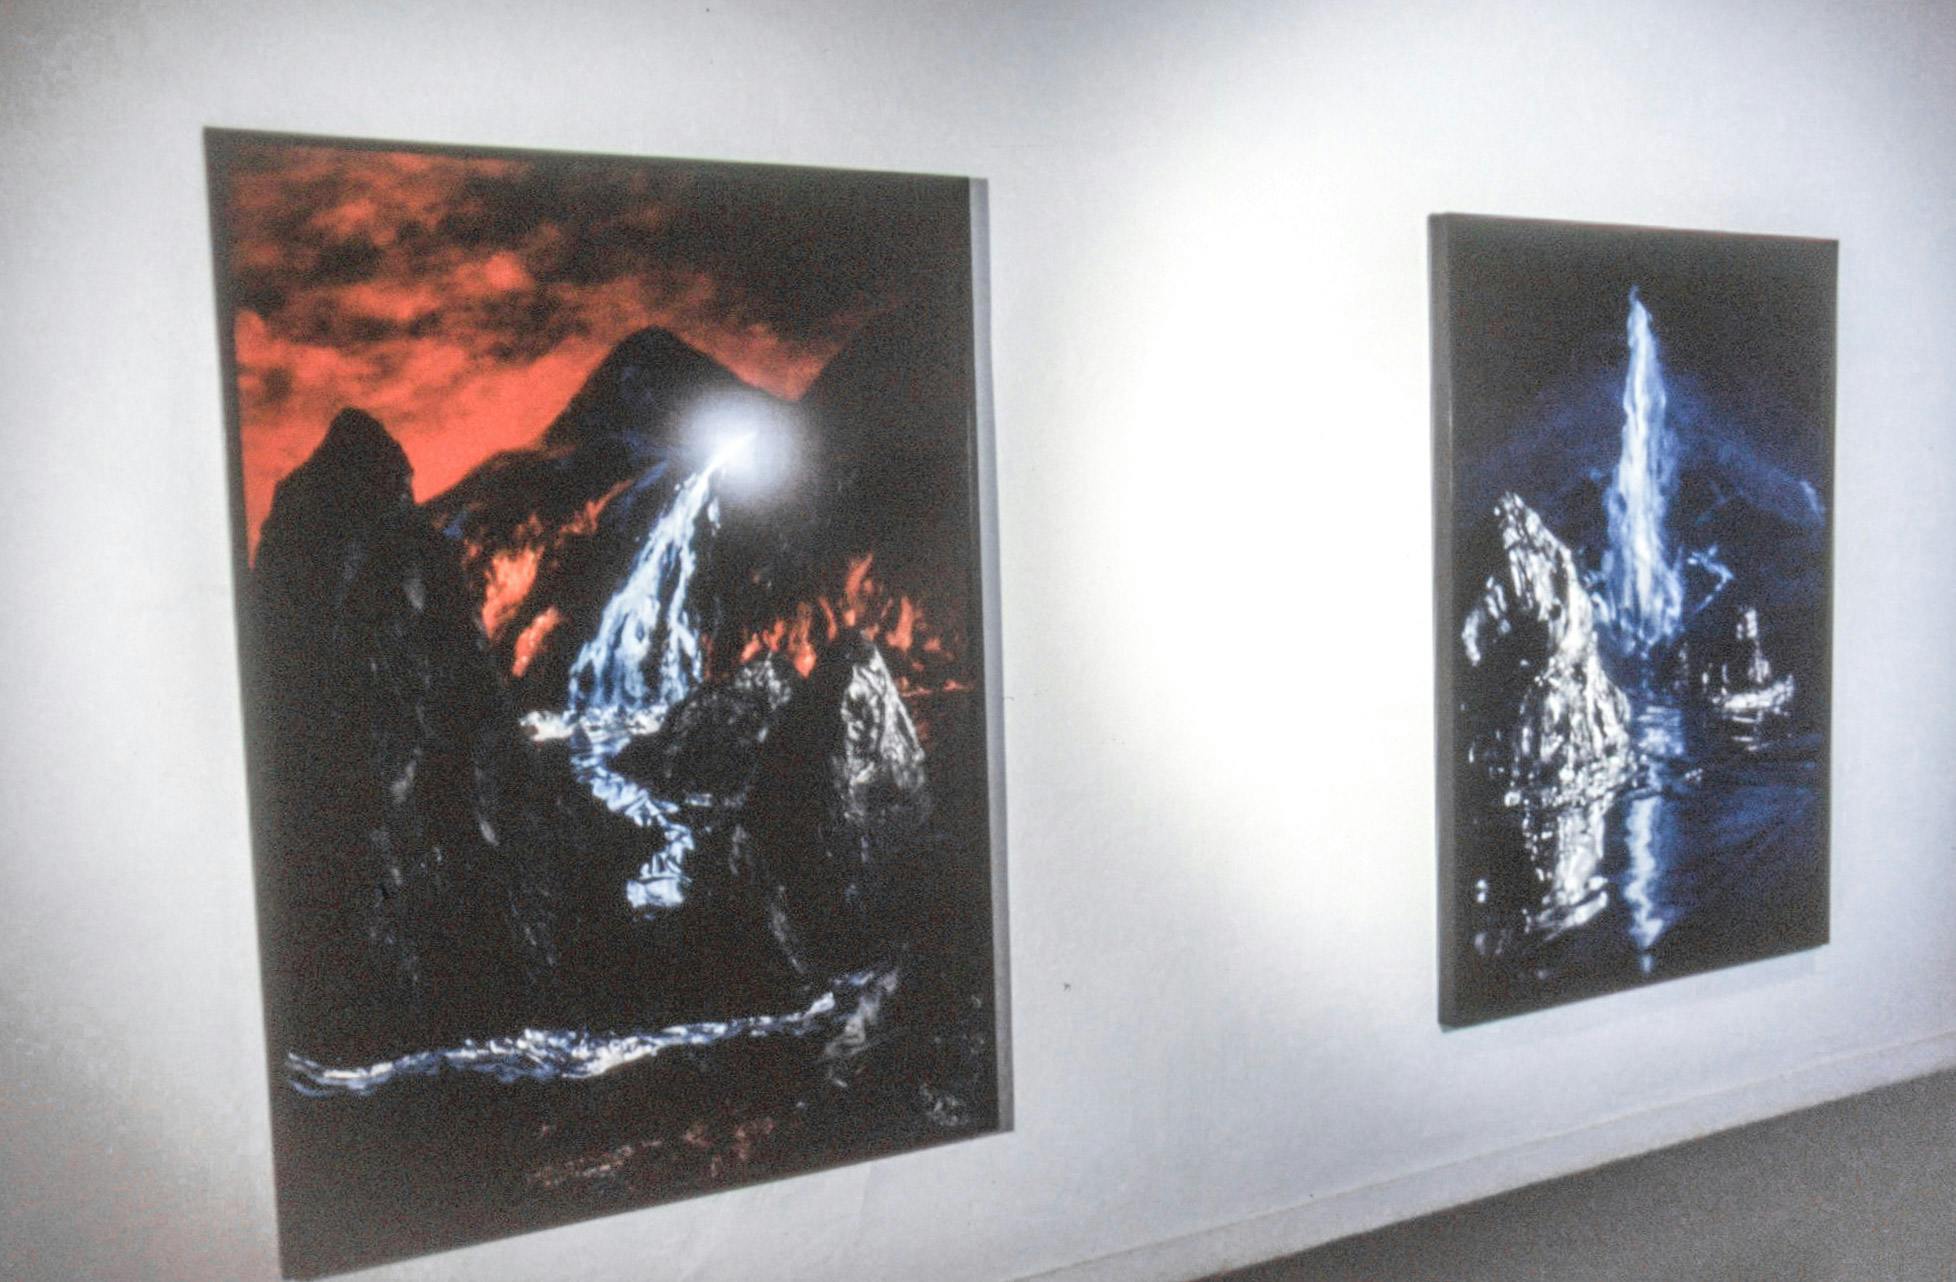 2 very large photos mounted on the wall of a dark room. One photo appears to show an erupting volcano with a red sky, and the other shows a mountain-like glacier and water scene. 